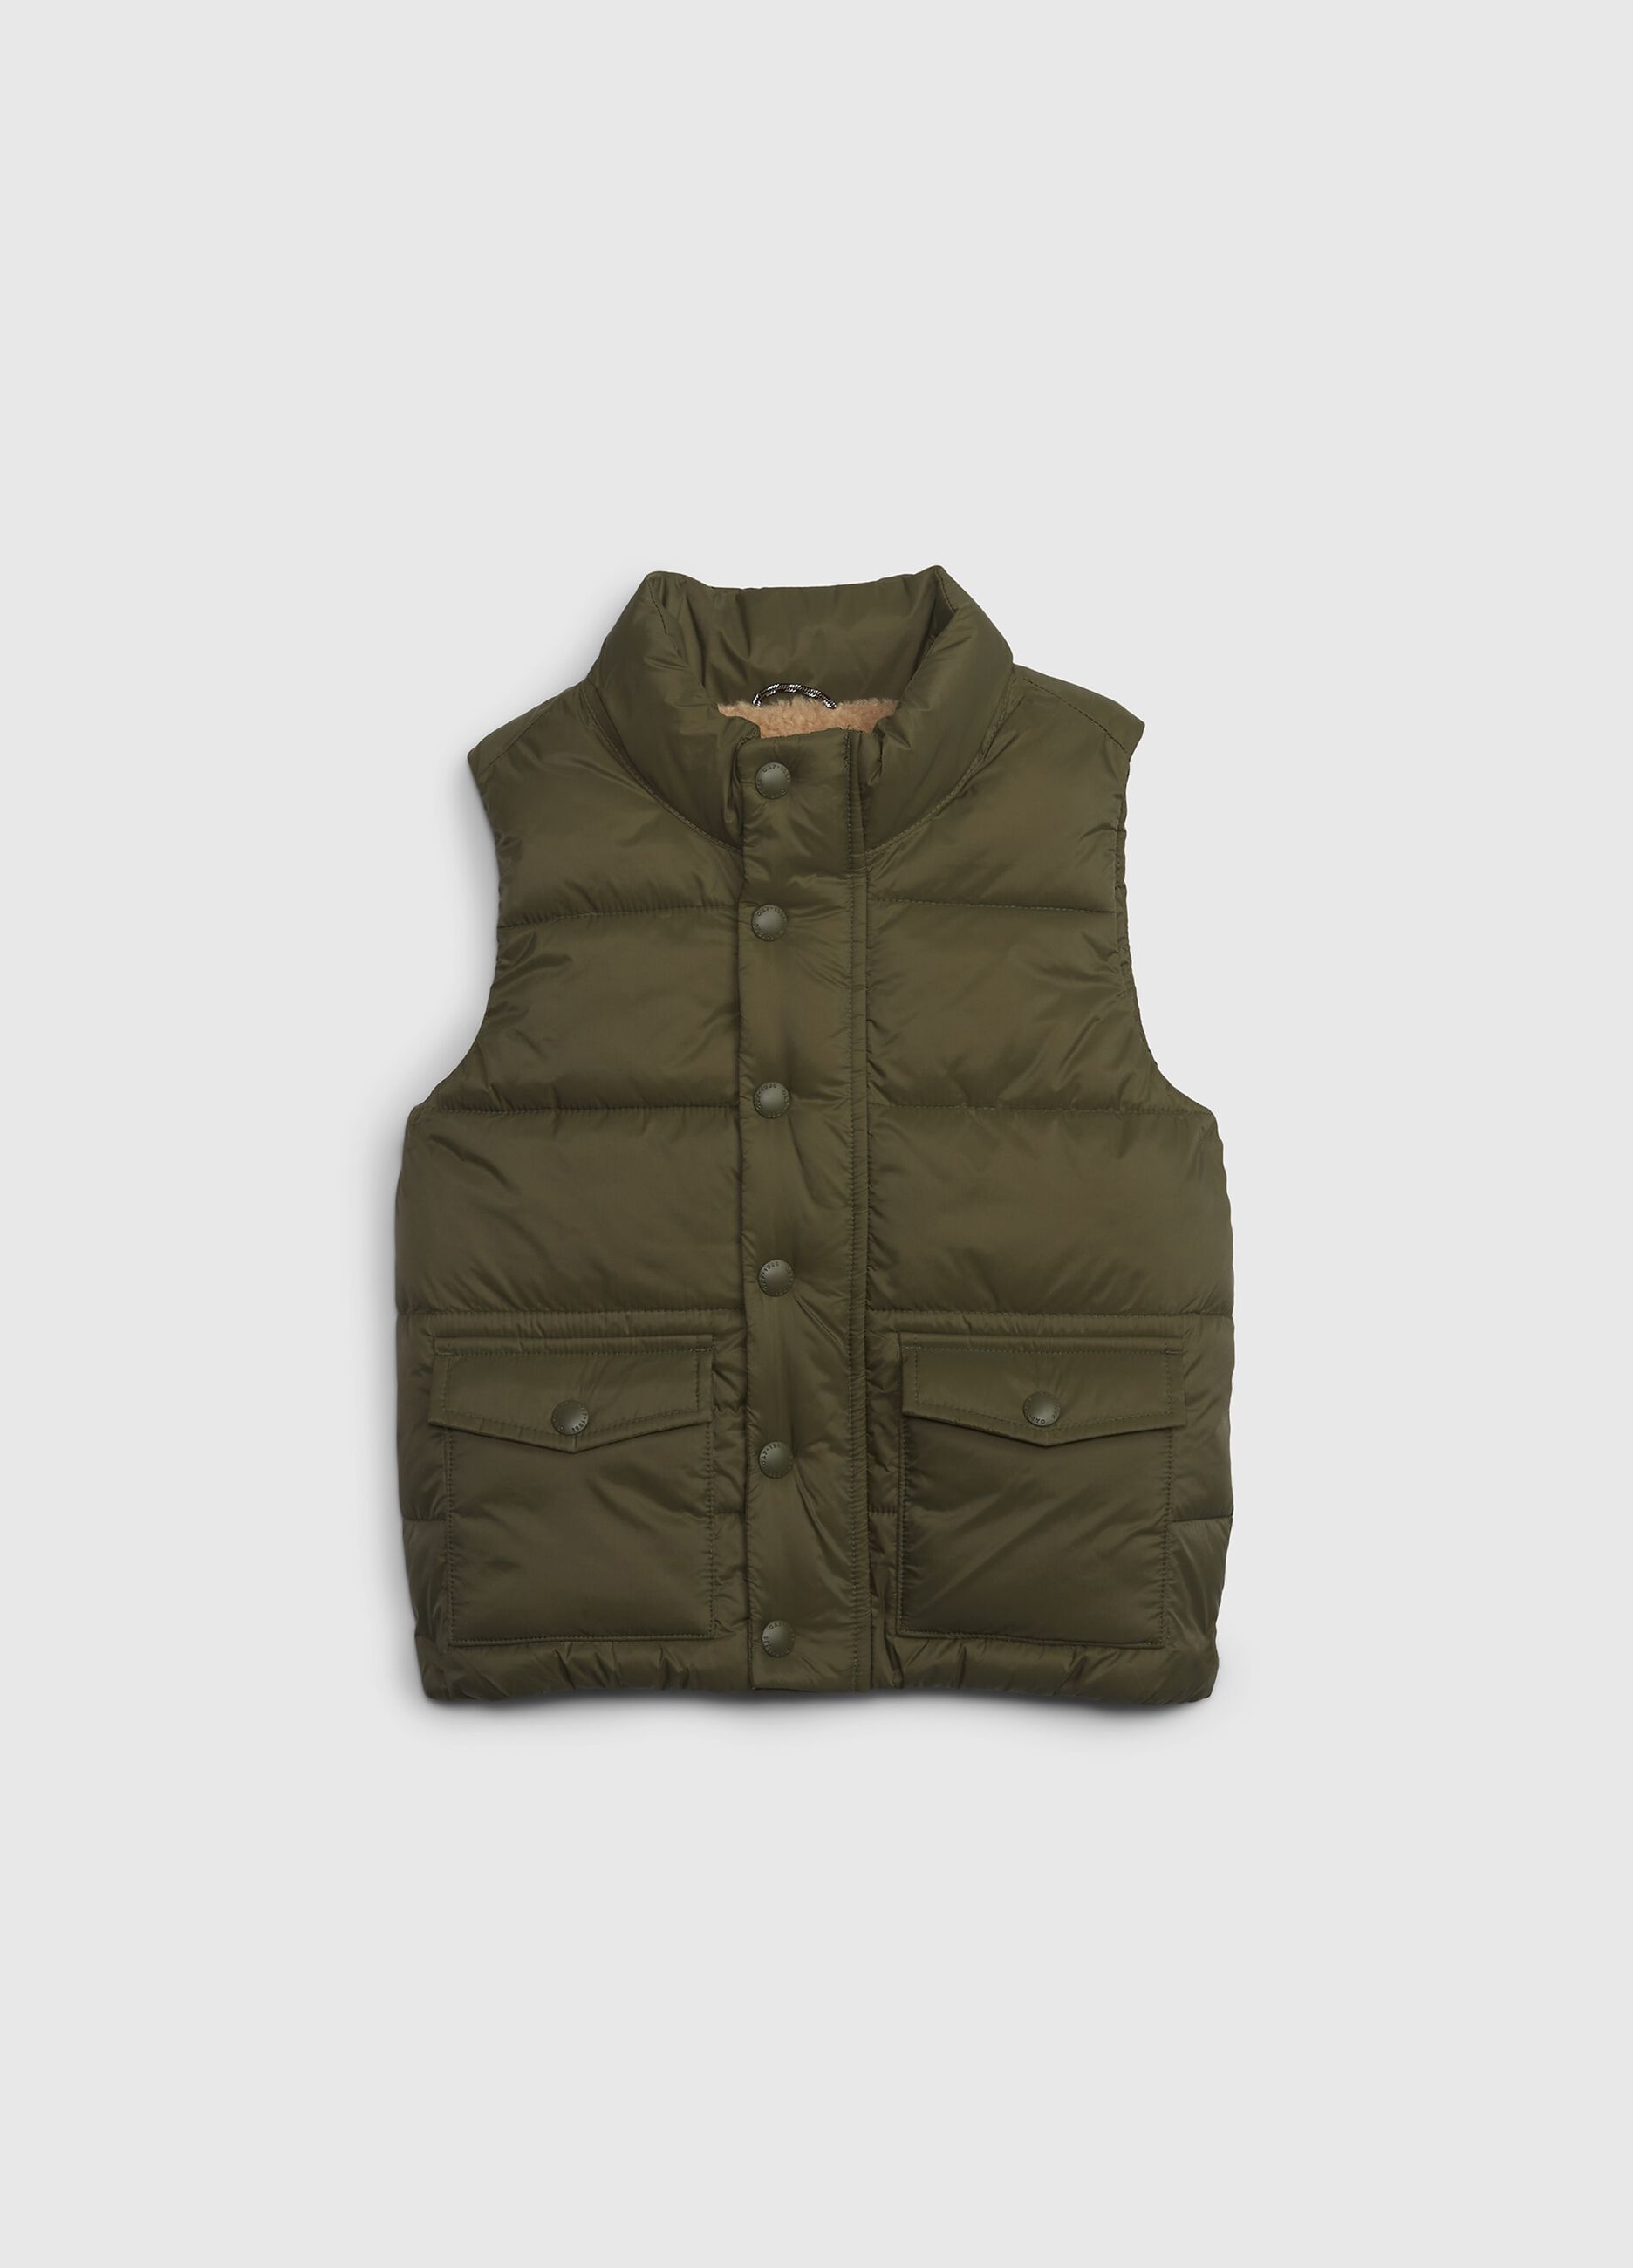 Gilet with sherpa lining